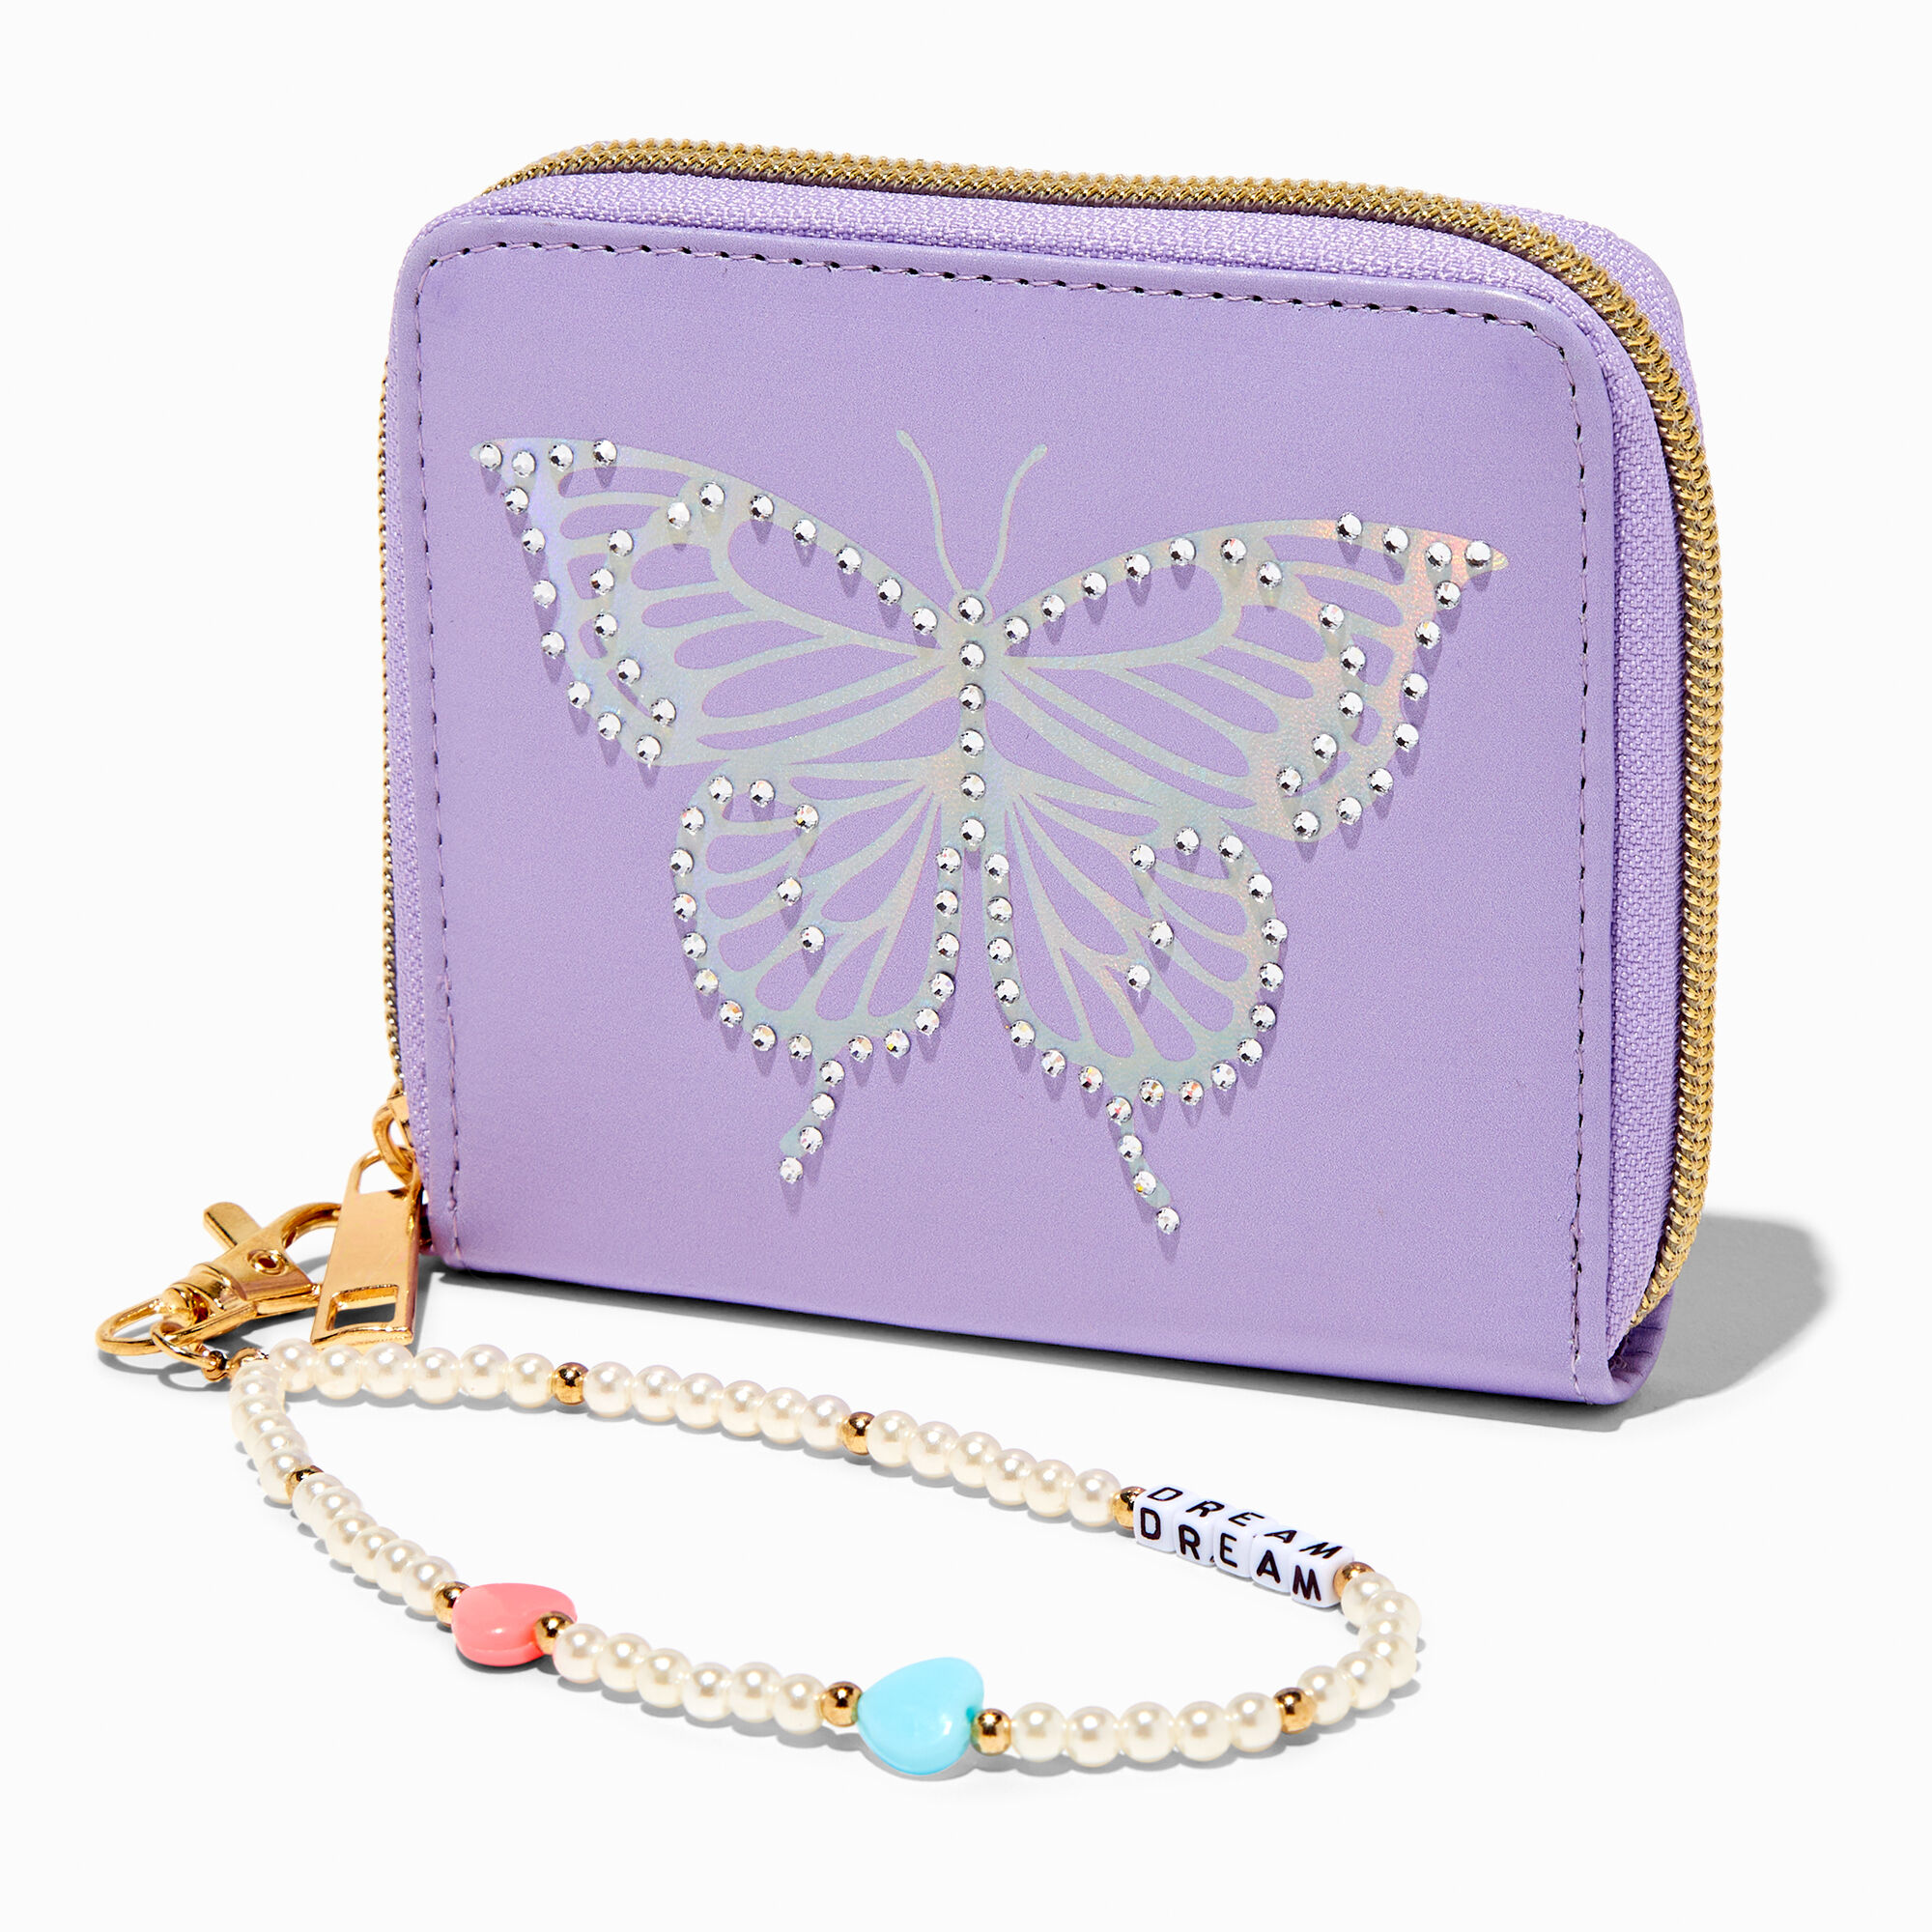 View Claires Lavender Butterfly Wristlet Wallet information